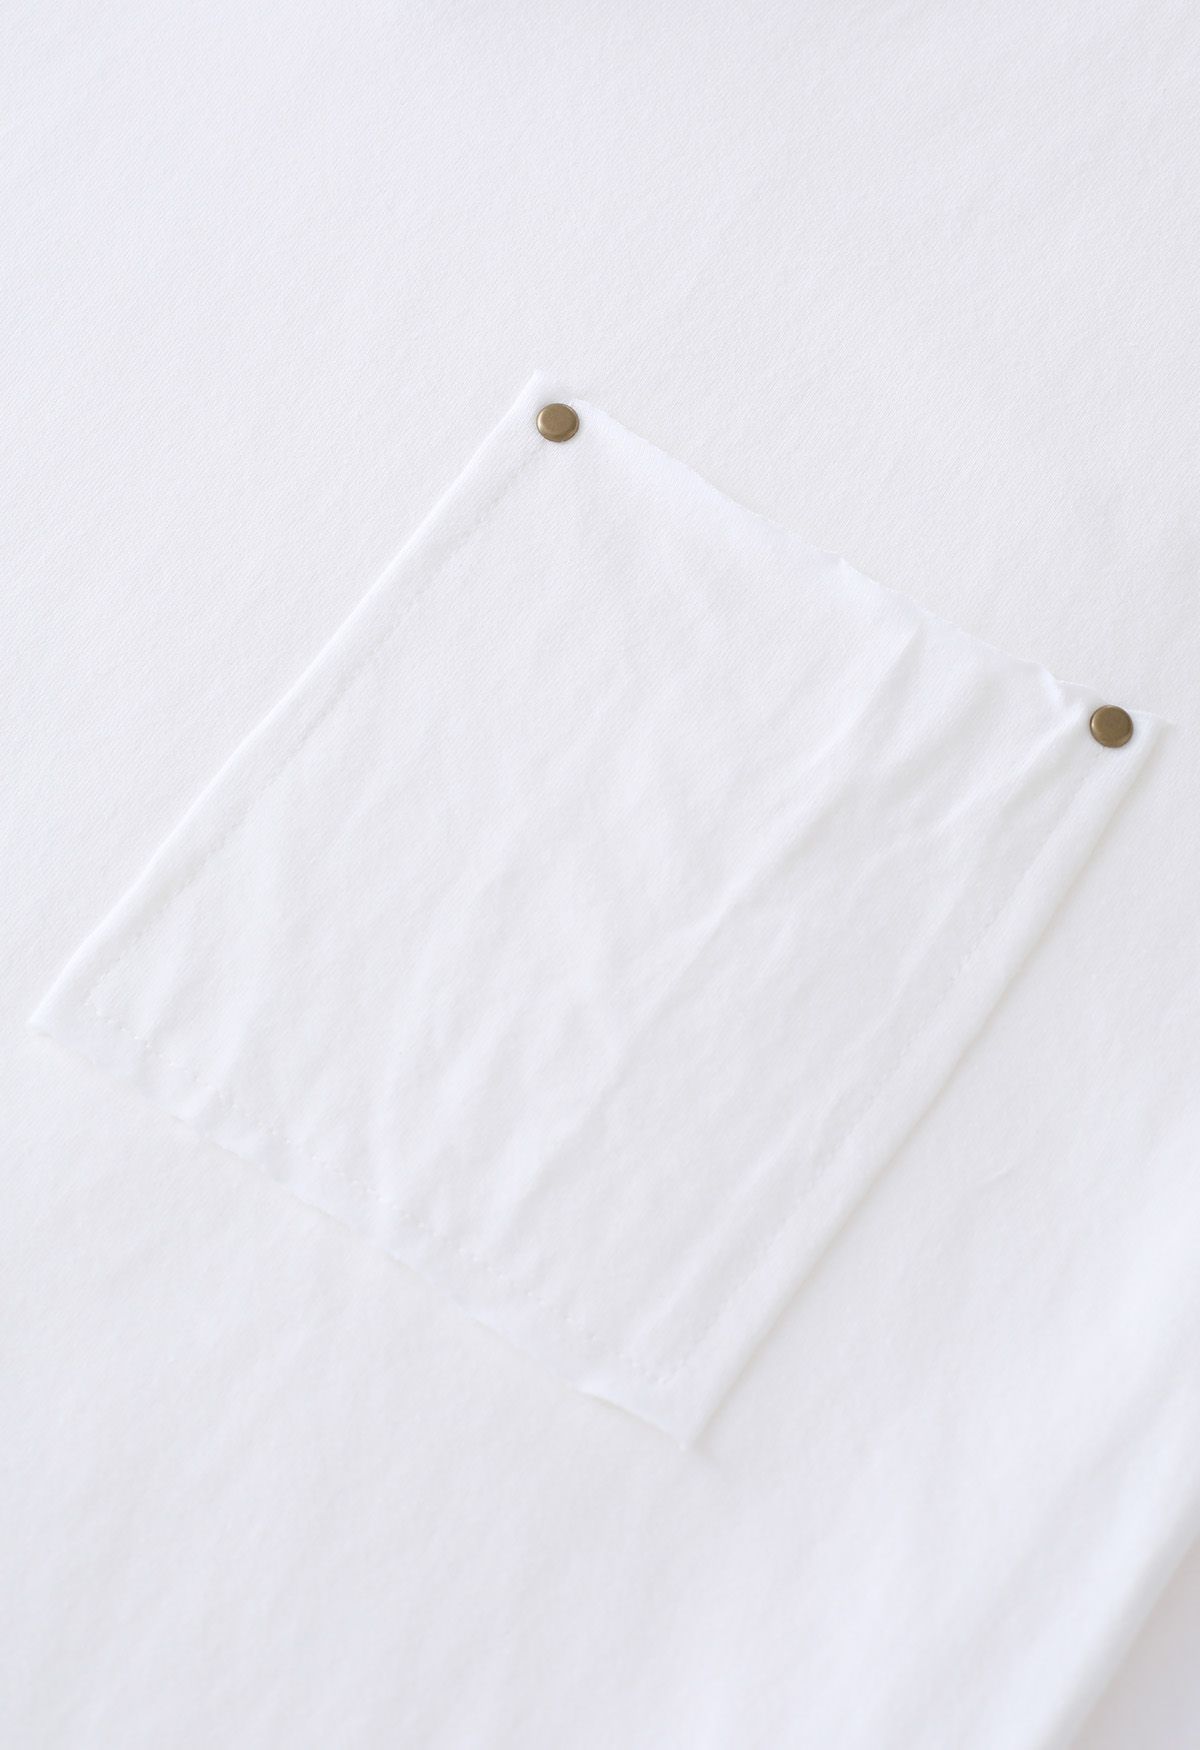 V-Neck Patch Pocket Raw-Cut T-Shirt in White